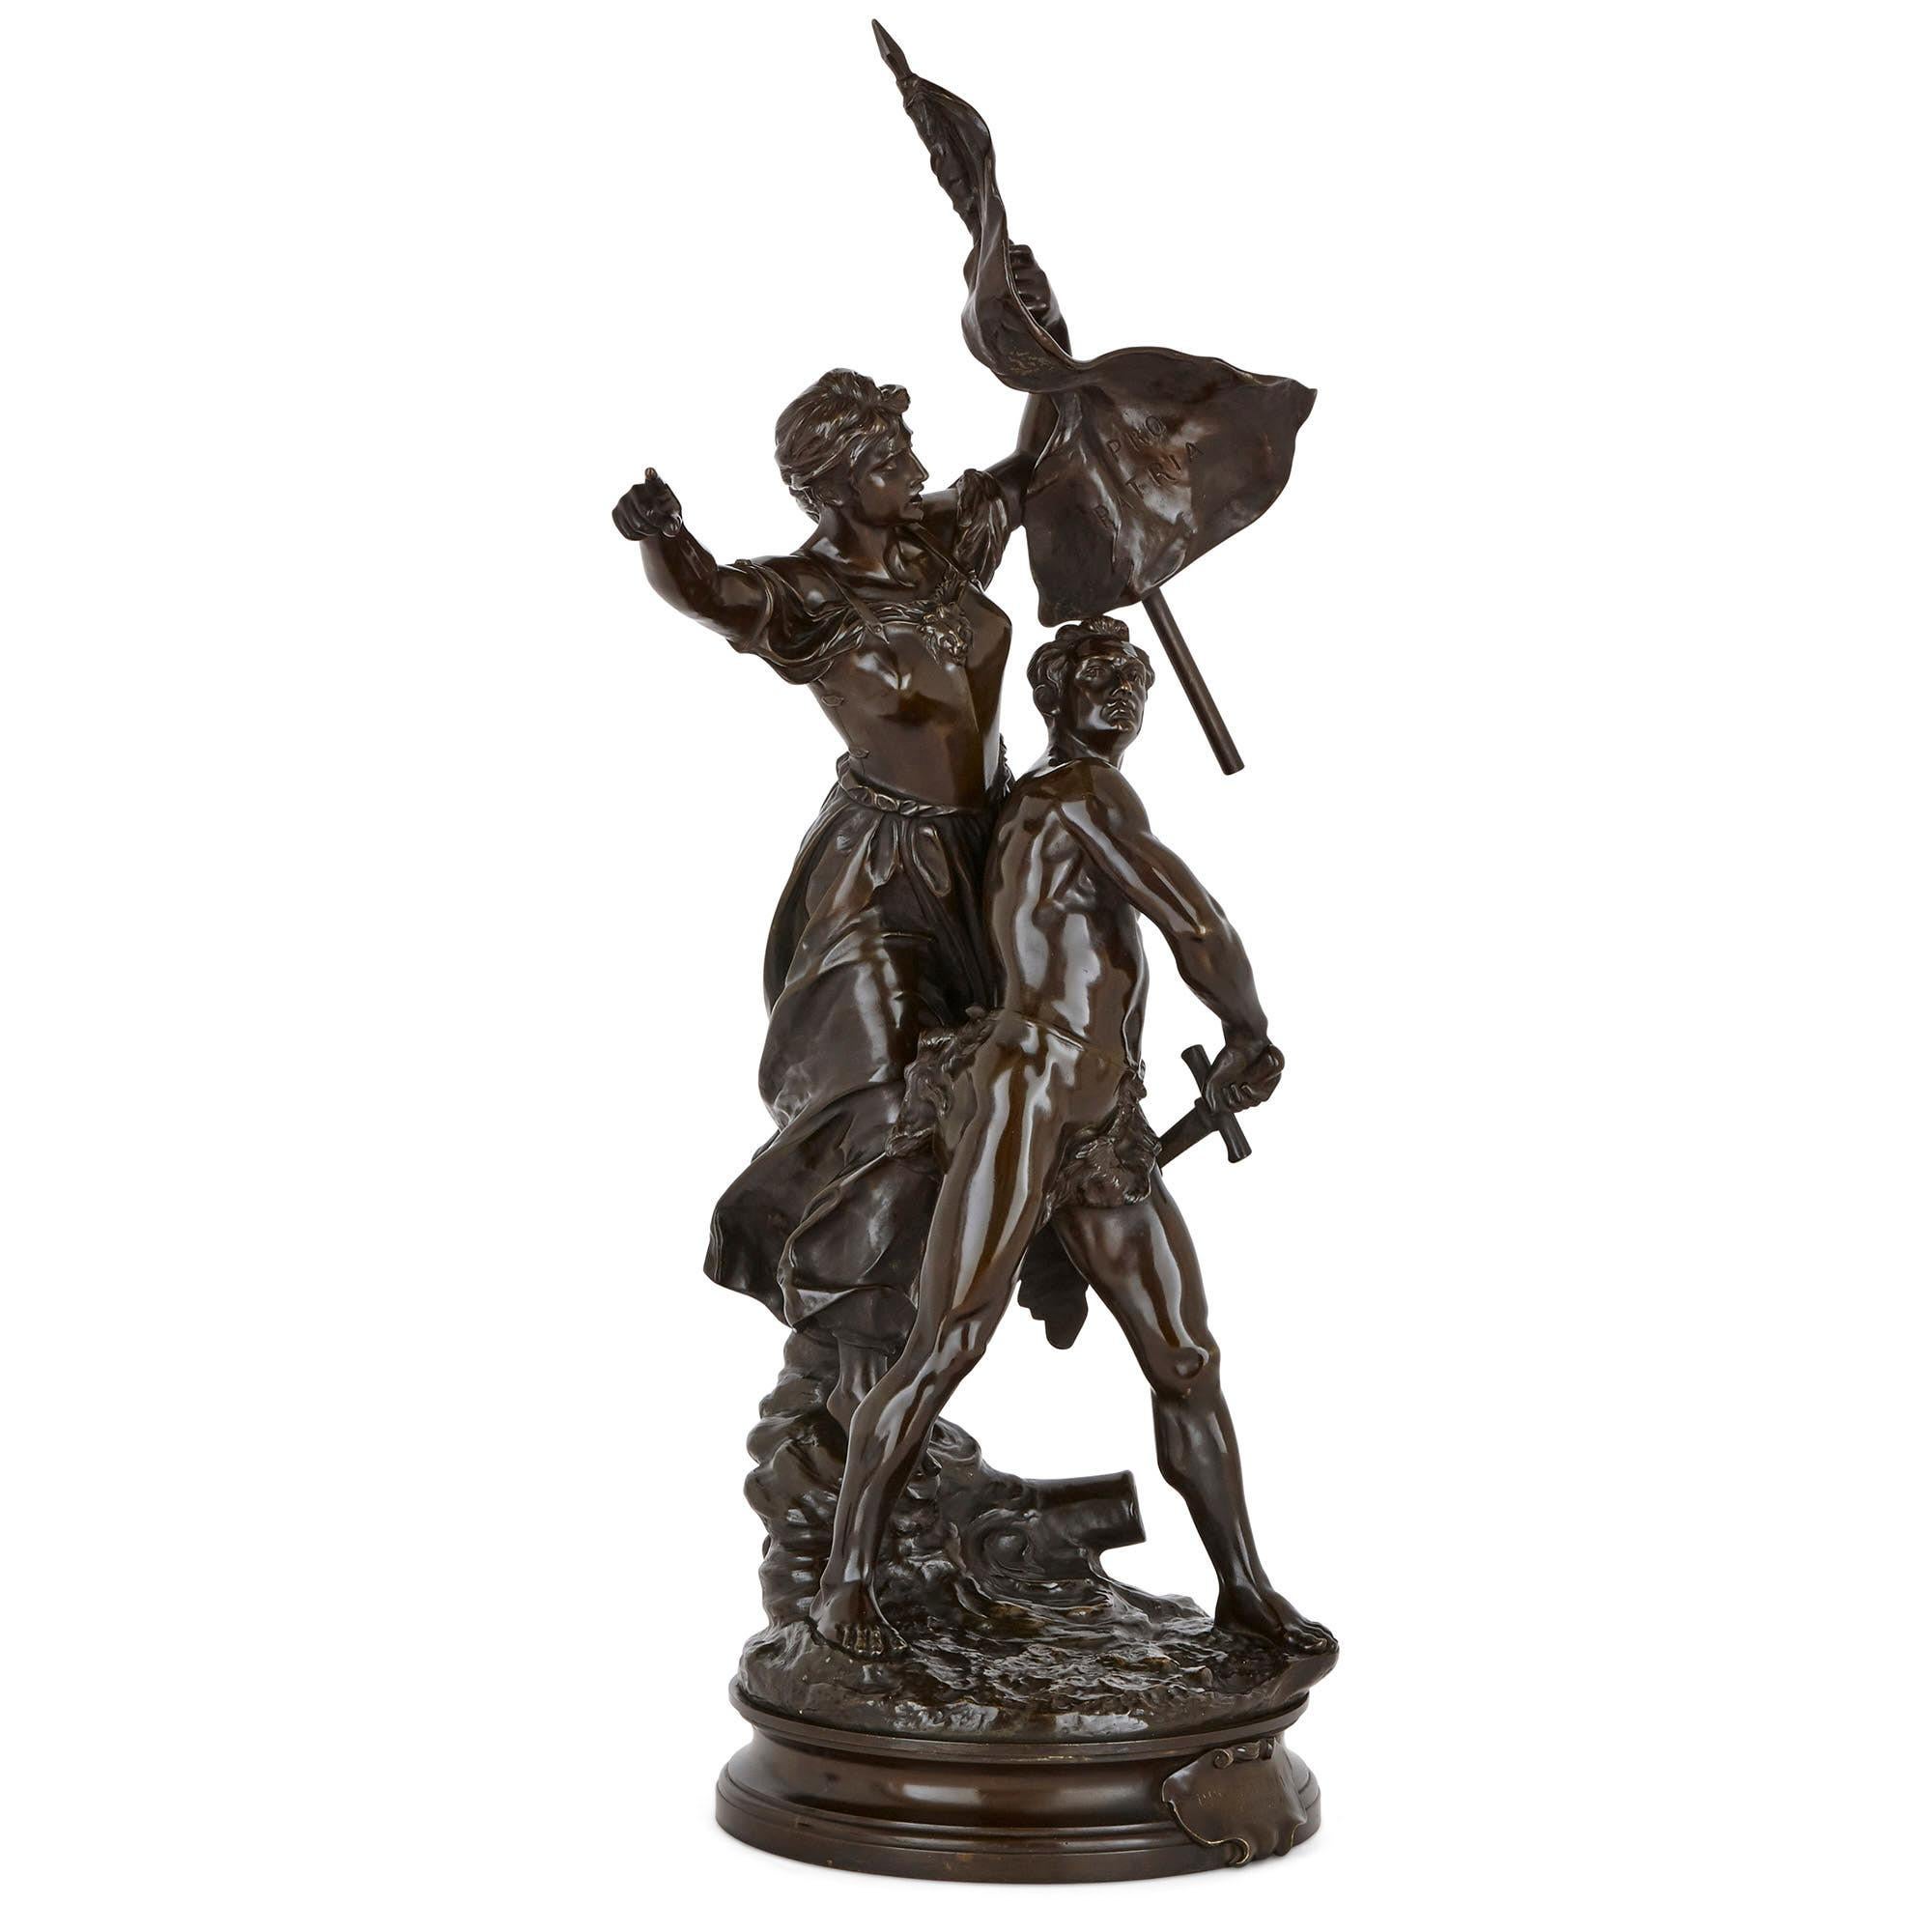 This compelling patinated bronze sculpture was cast from a model made by the famous French sculptor, Adrien Etienne Gaudez (1844-1902). Gaudez was trained by the artist Francois Jouffroy before studying at the Ecole des Beaux-Arts in Paris. Gaudez